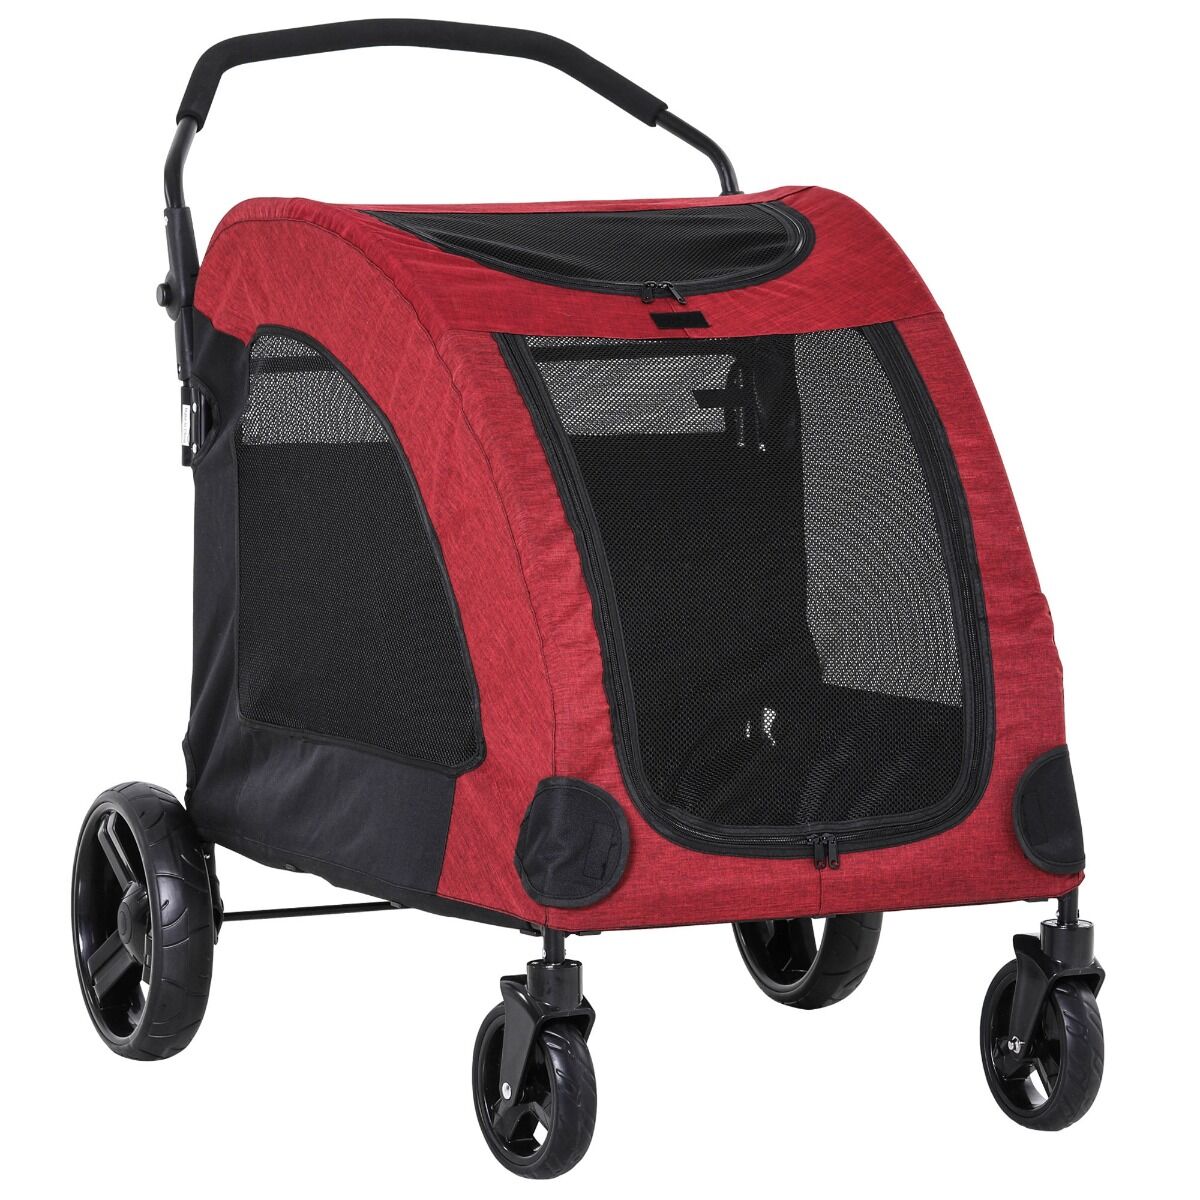 PawHut Pet Stroller for Medium Size Dogs with Storage Basket, Ventilated Foldable Oxford Fabric, Universal Wheel,  Red